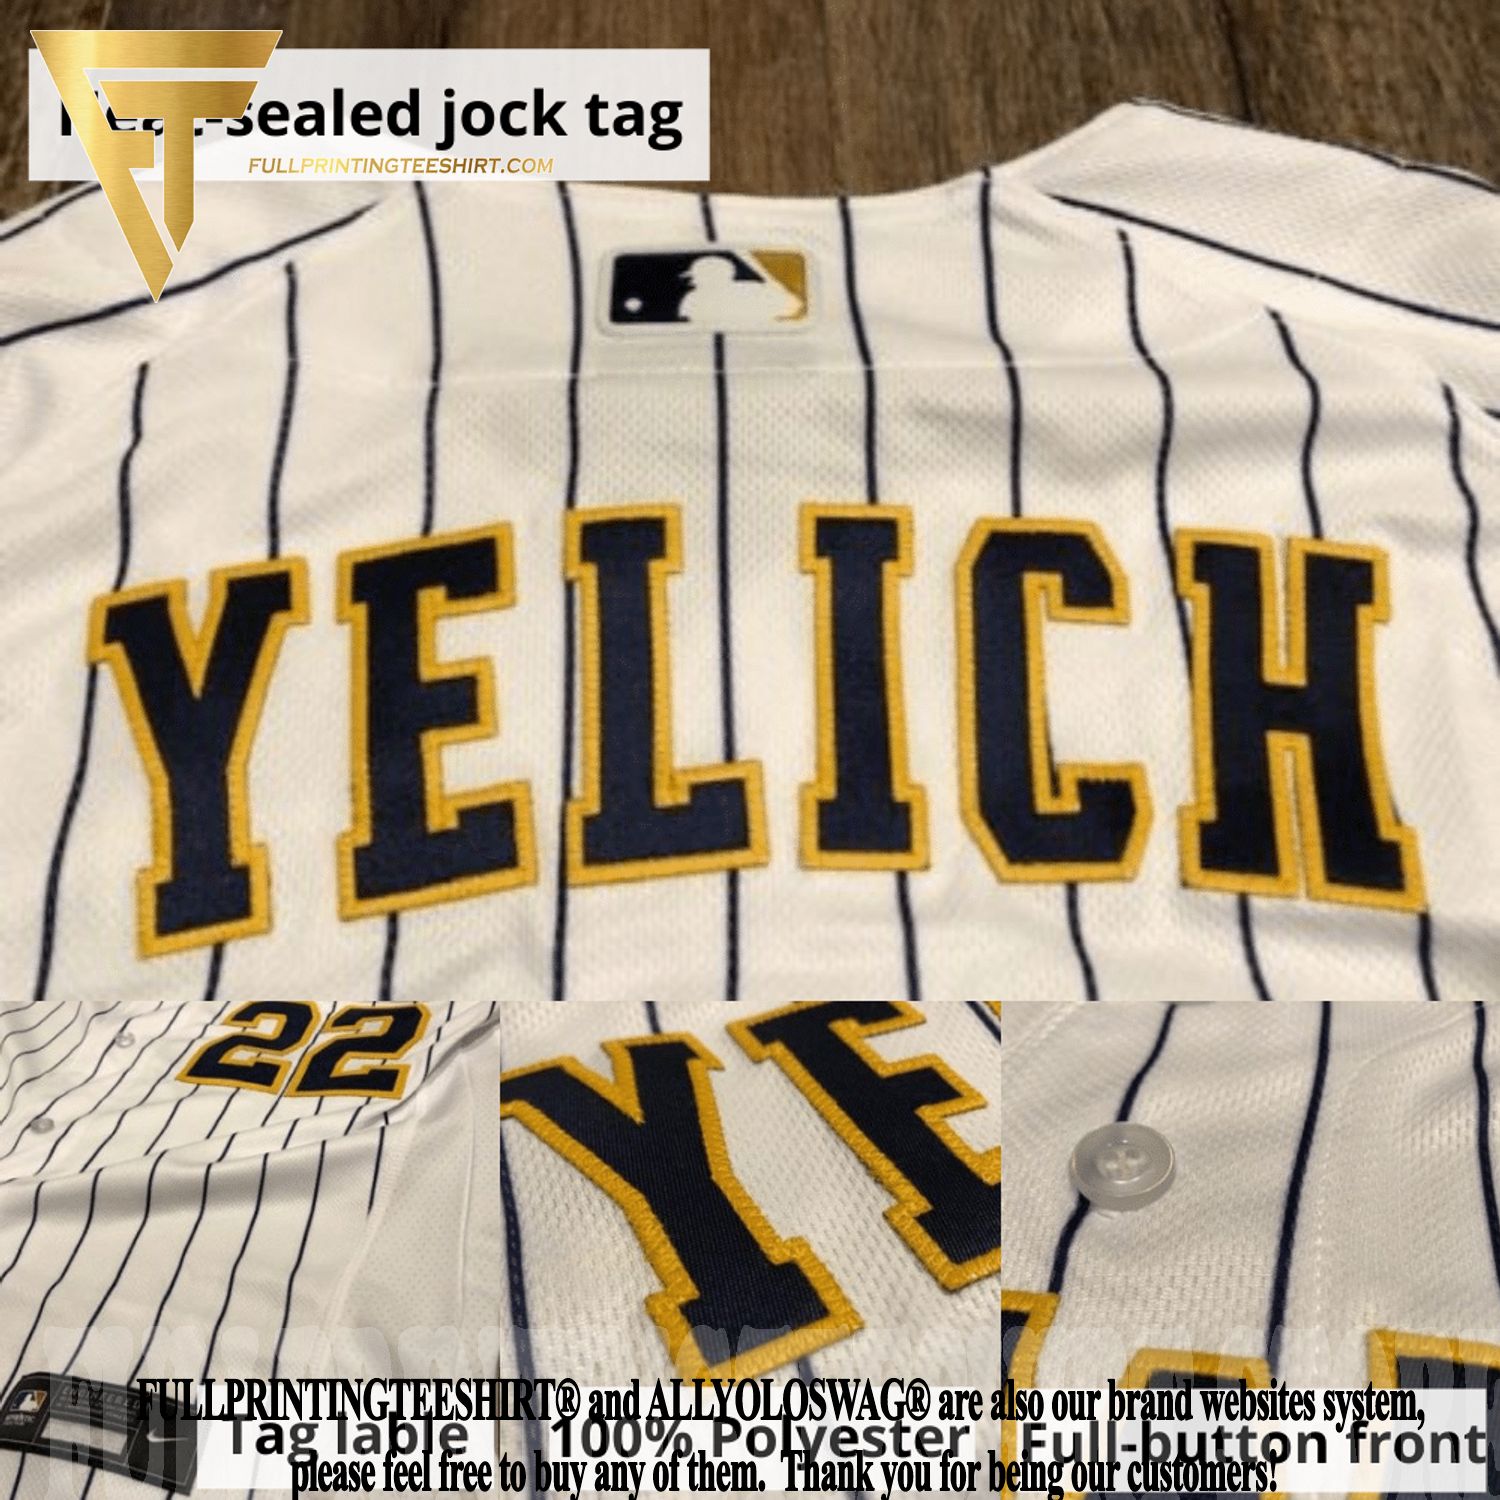 dodgers yellow jersey